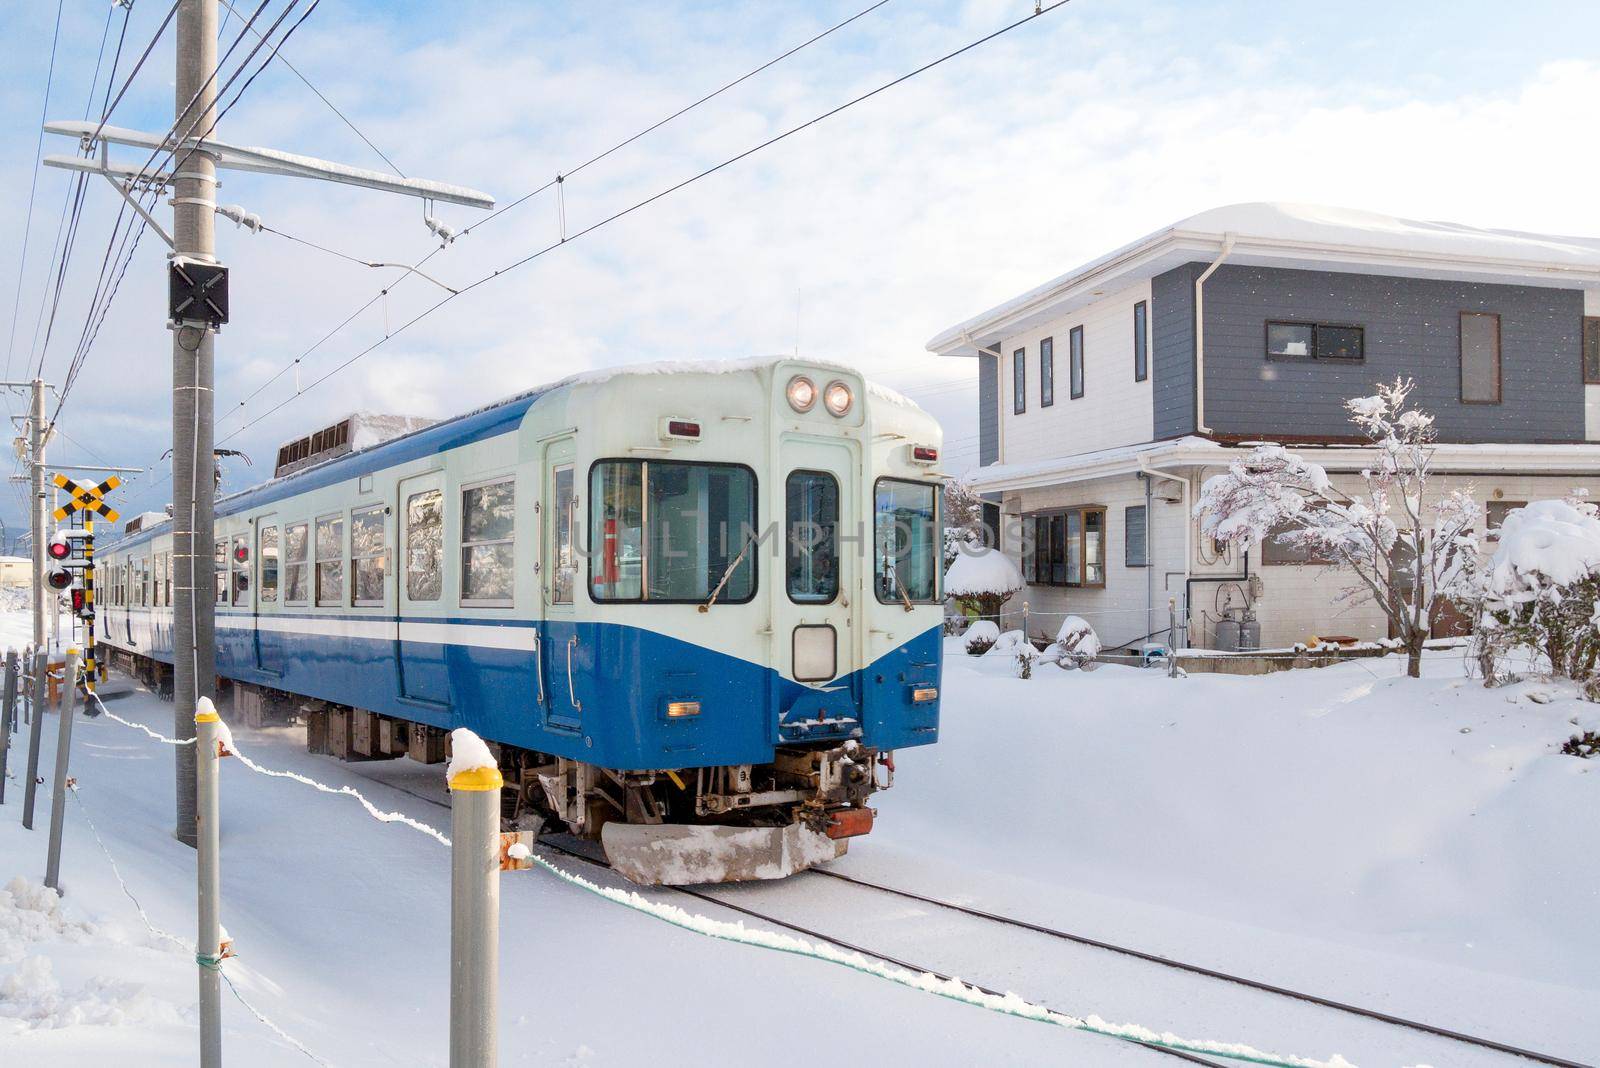 Train moving on railway track for local train with white snow fall in winter season,Japan by Nuamfolio